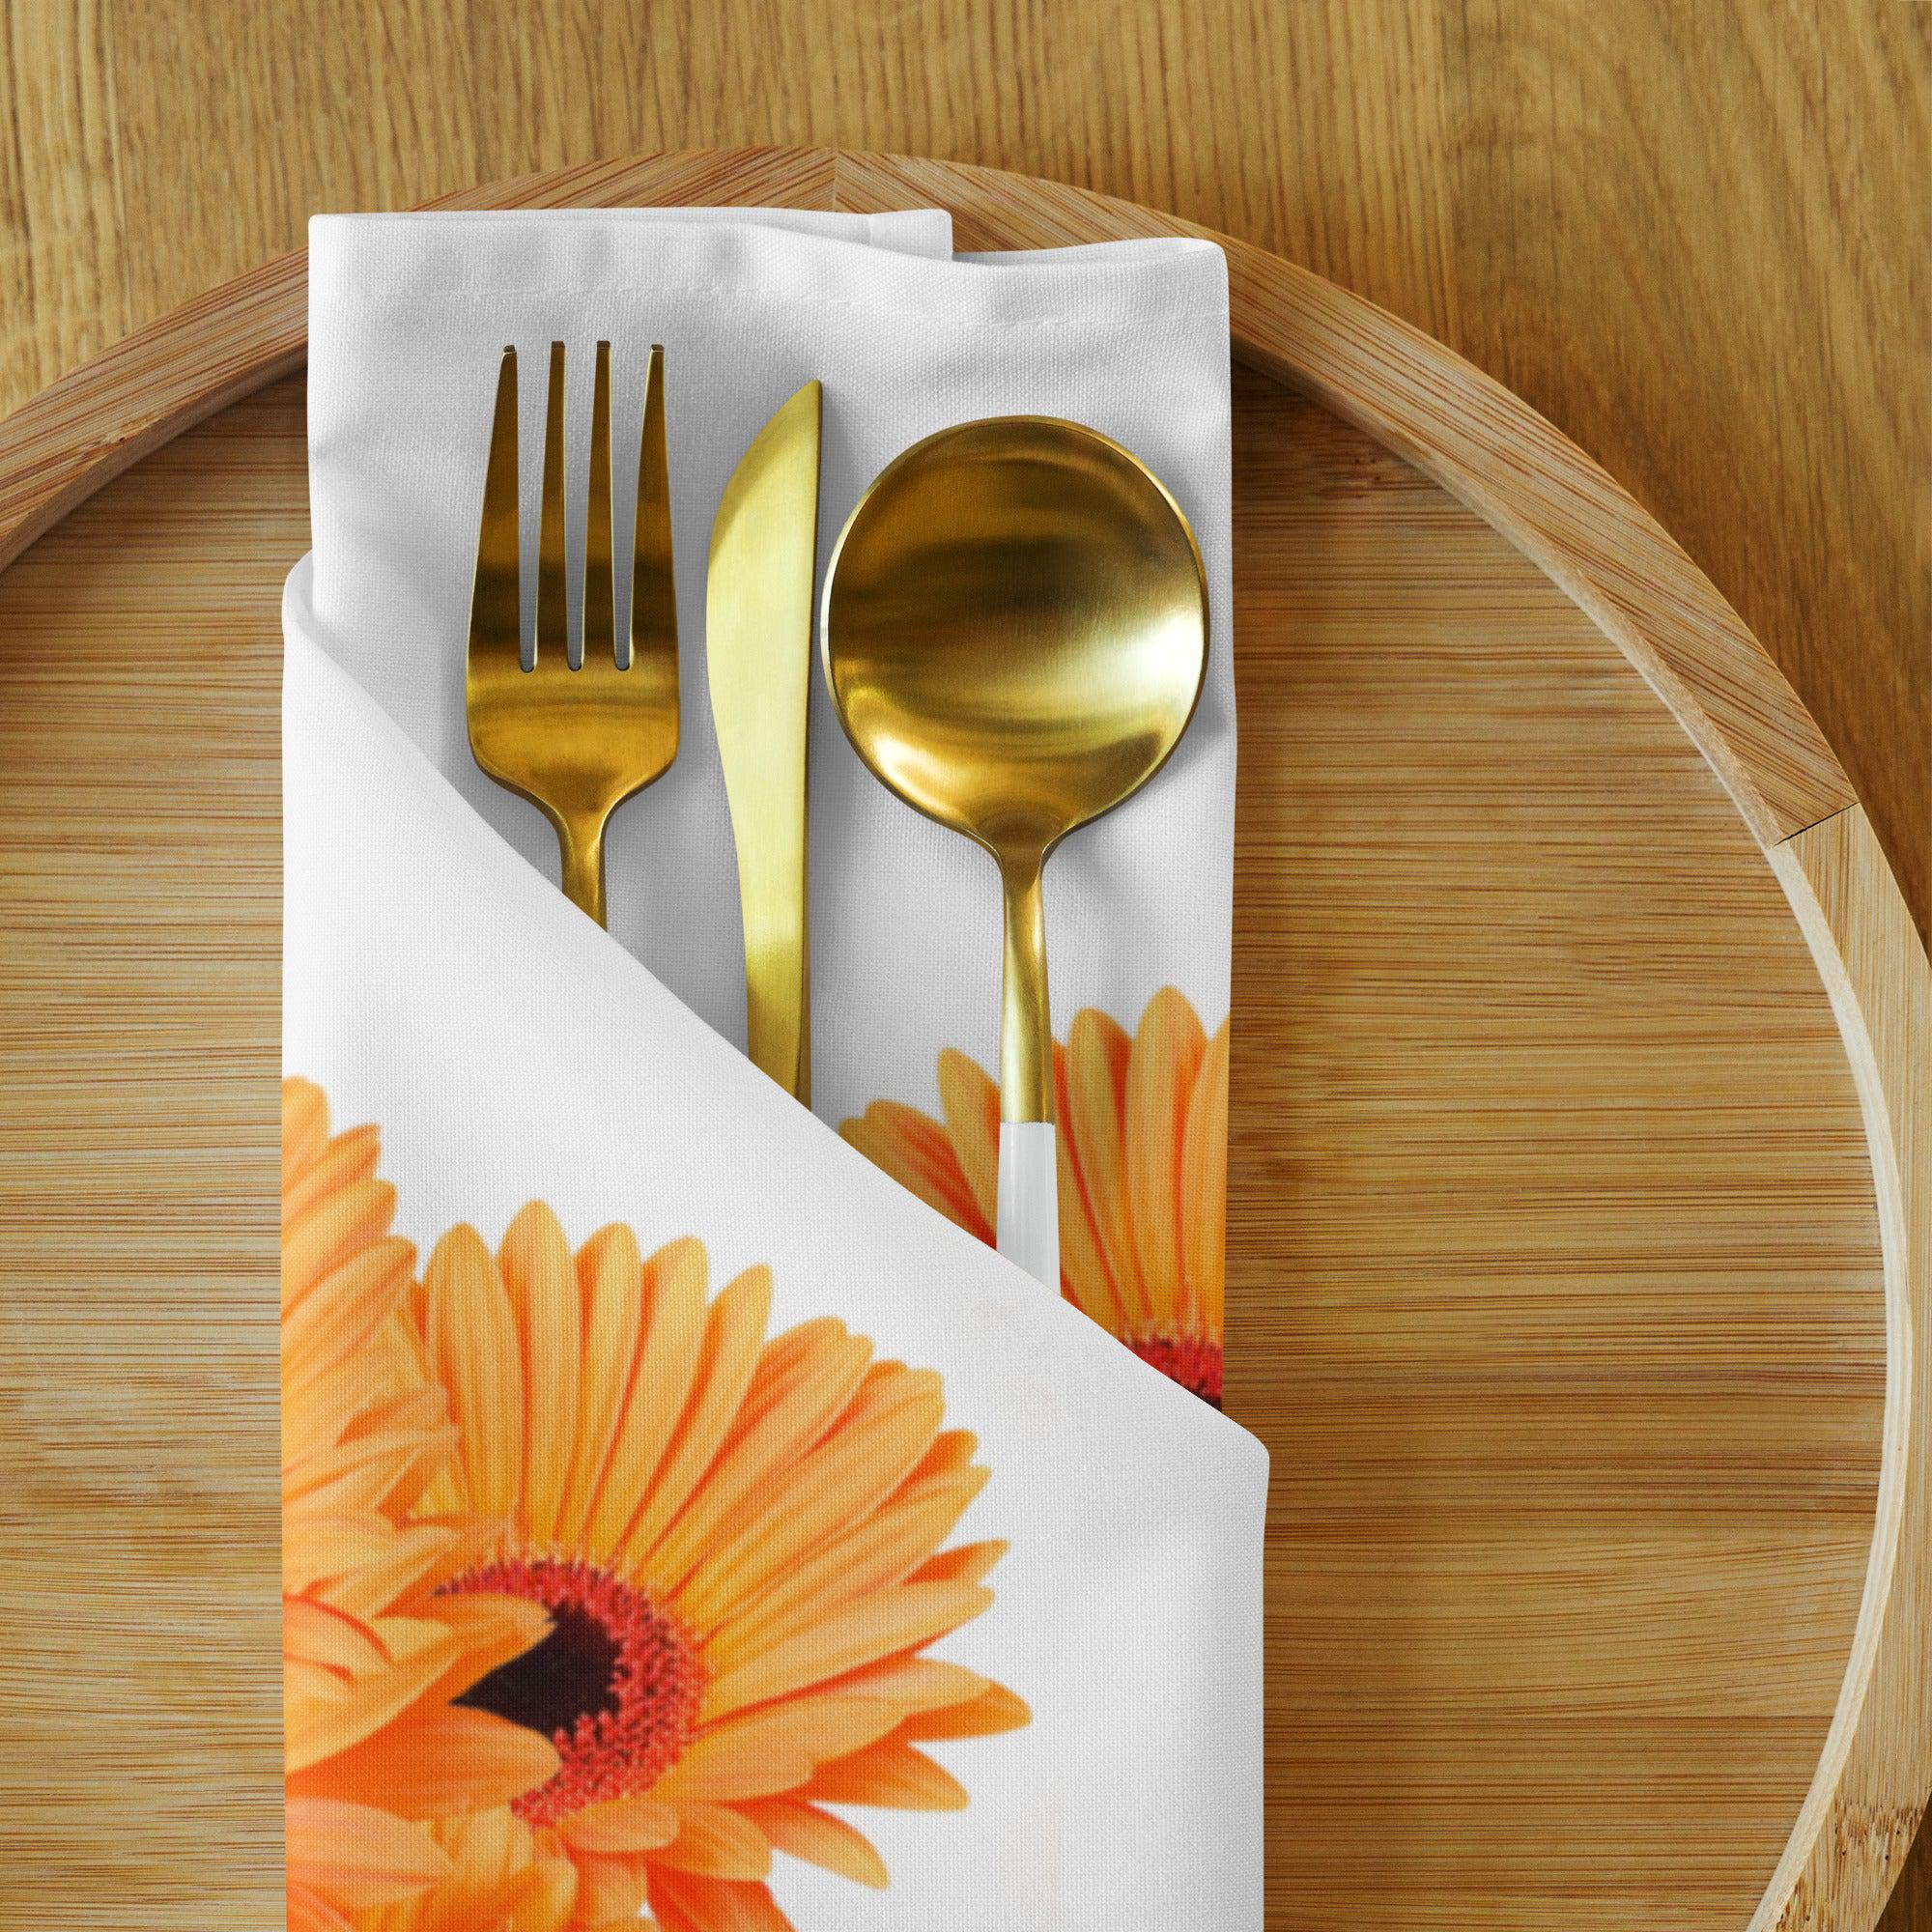 Blooming Elegance: Floral-Print Cloth Napkin Set – Bring the Beauty of Flowers to Your Table